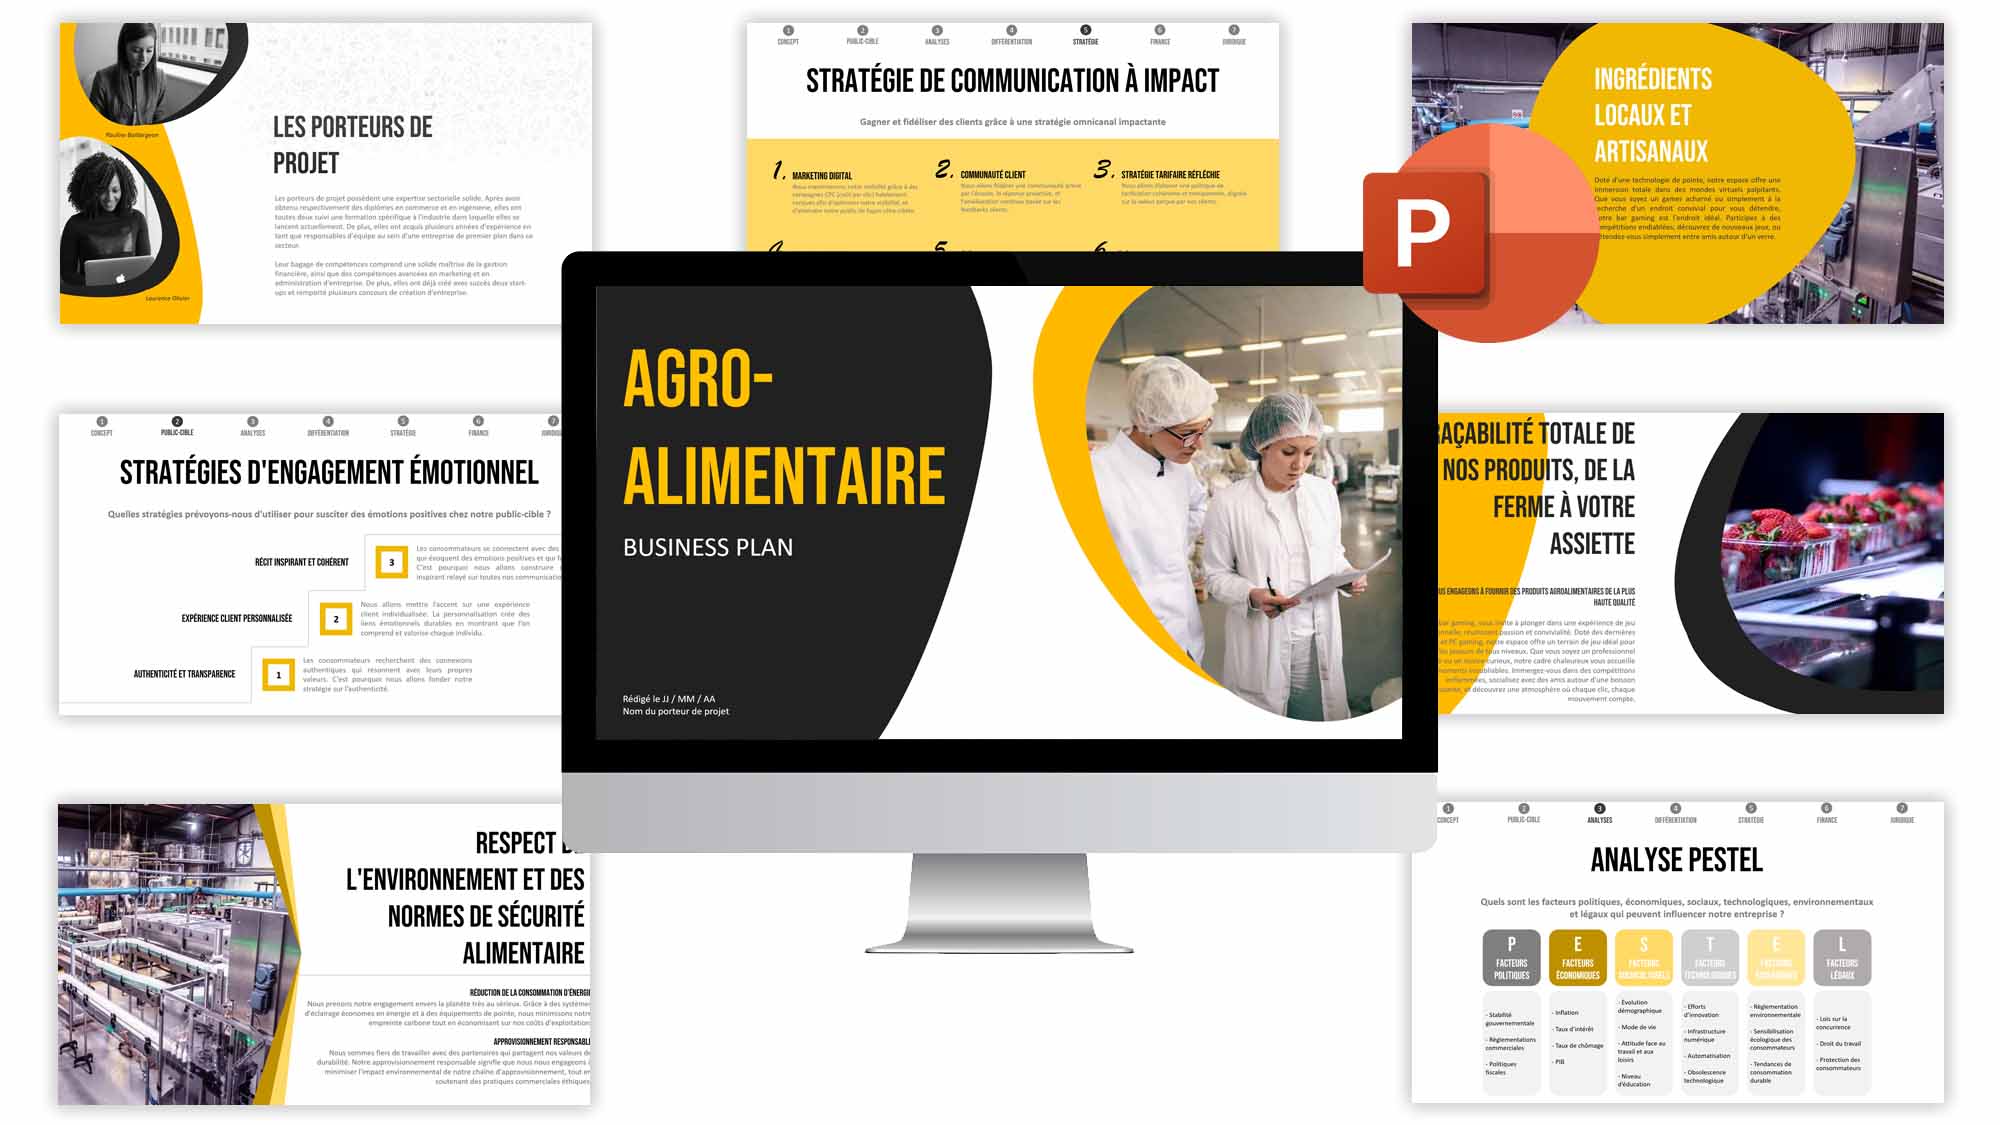 business plan agro alimentaire